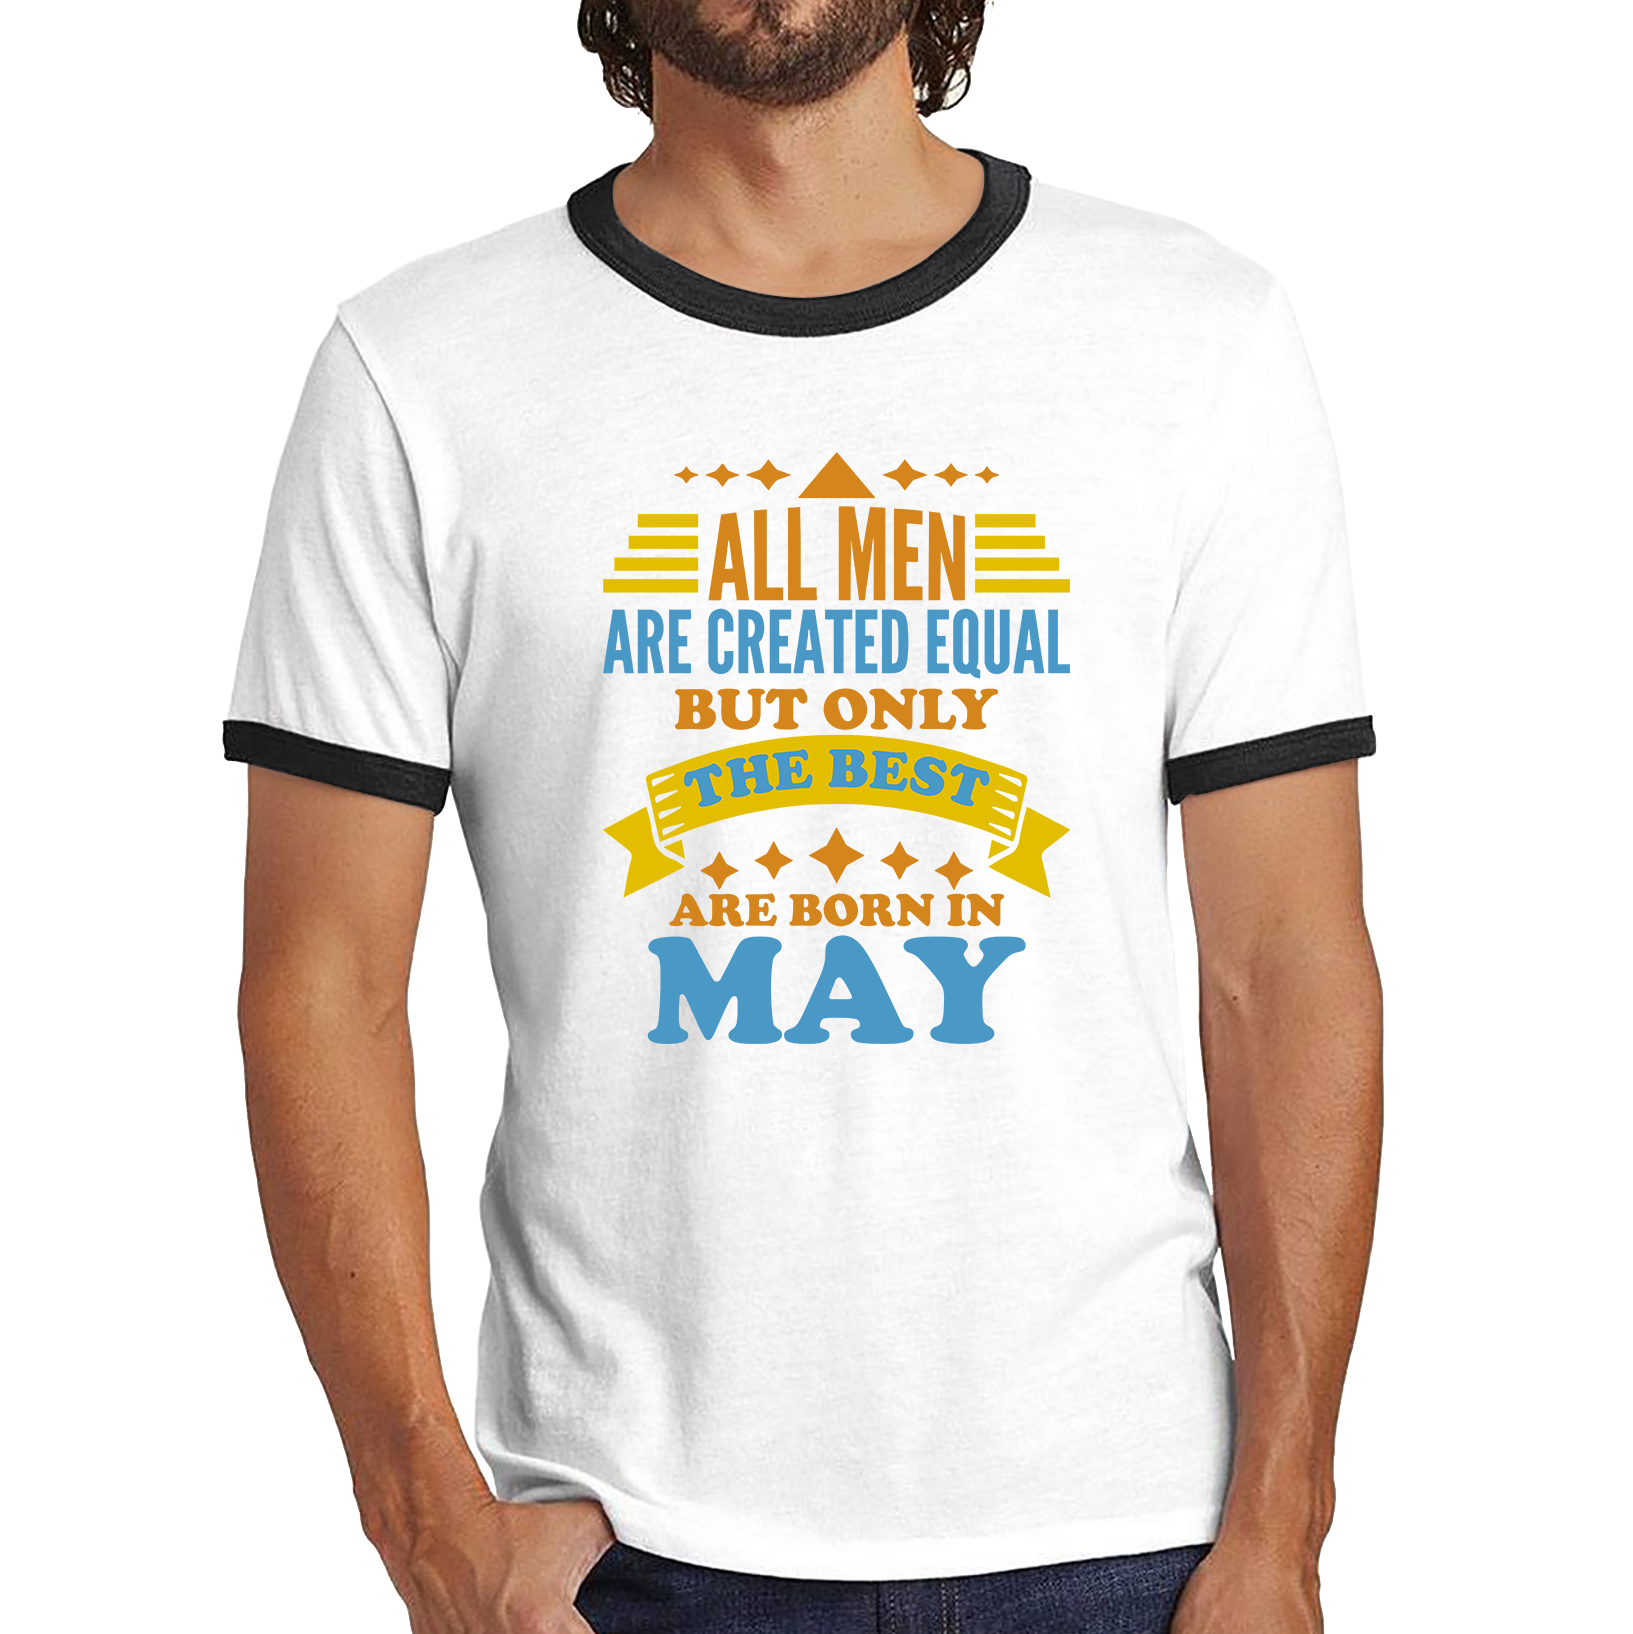 All Men Are Created Equal But Only The Best Are Born In May Funny Birthday Quote Ringer T Shirt